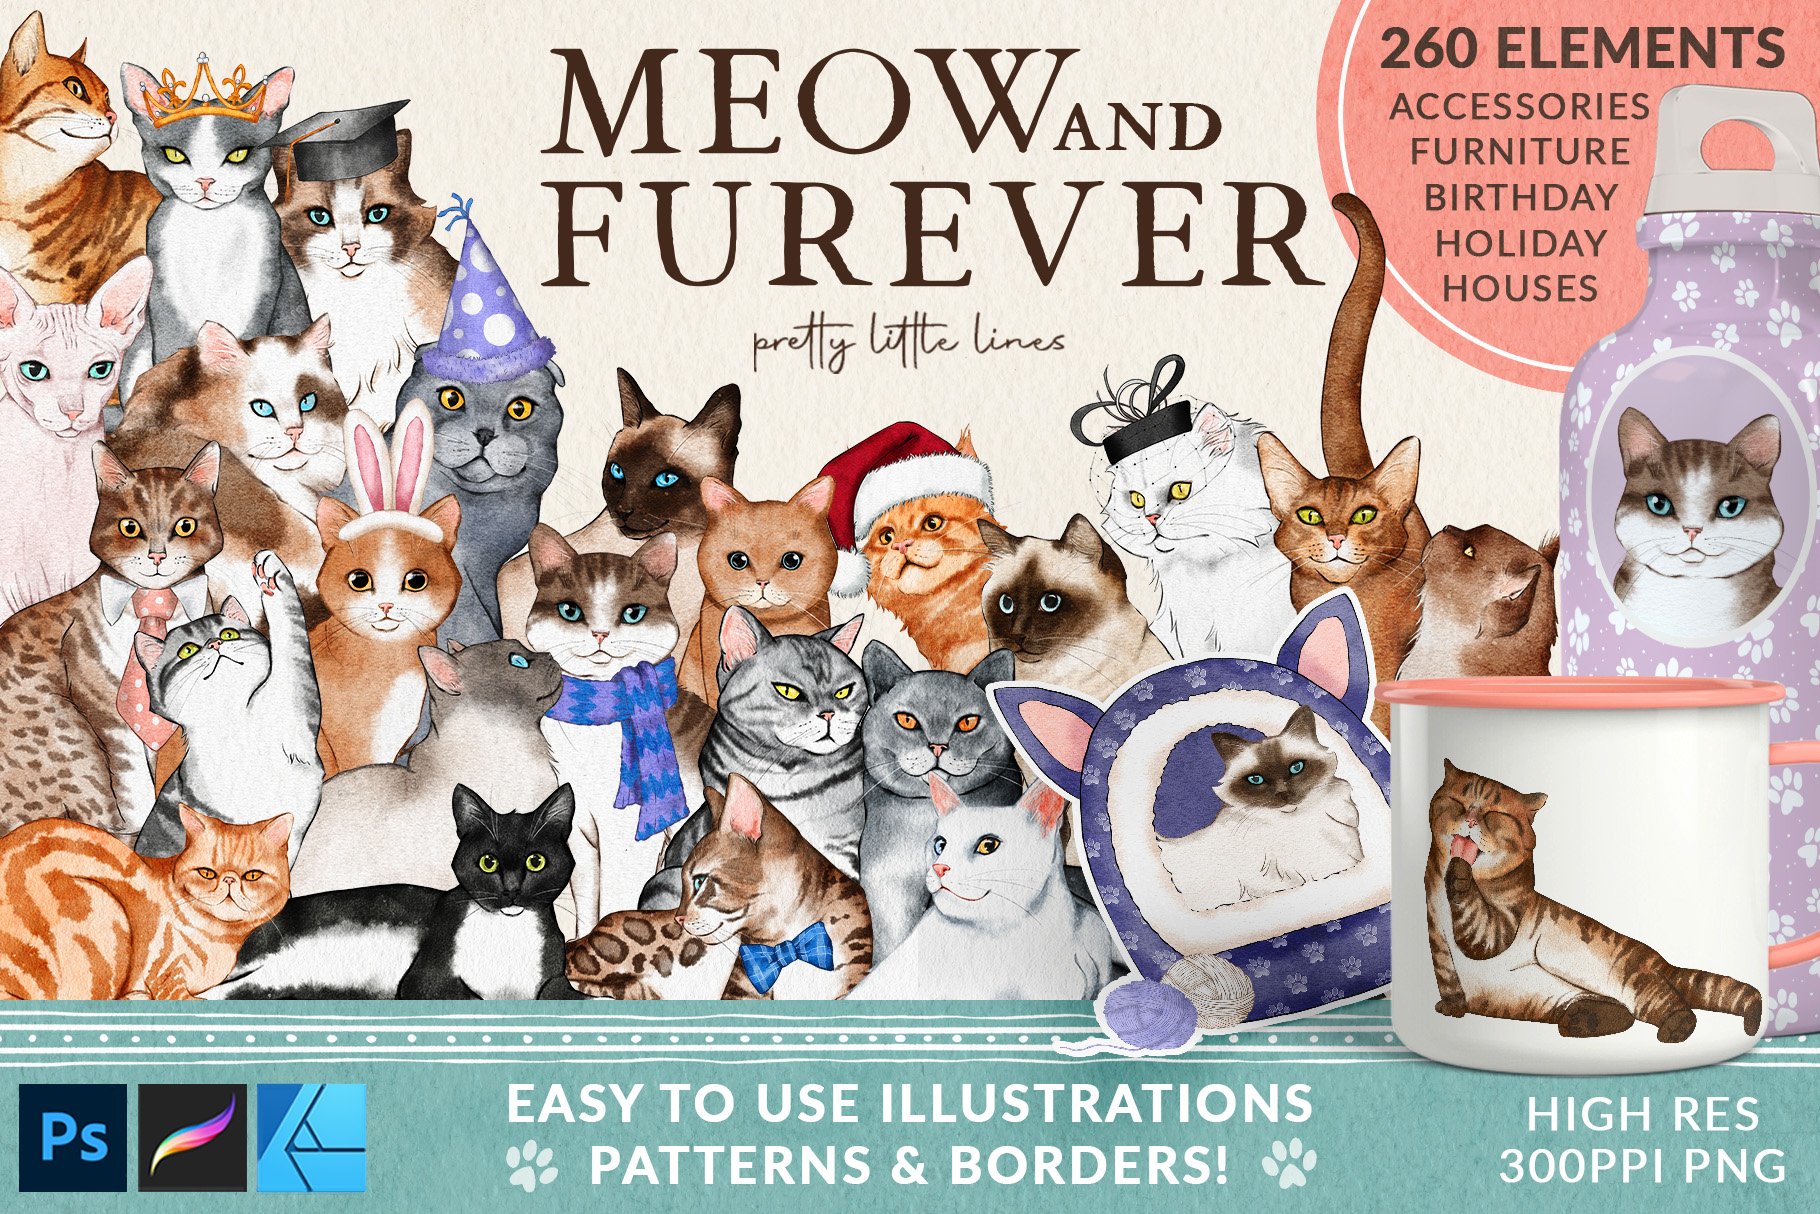 Meow And Furever - Cat Illustrations Patterns & Borders